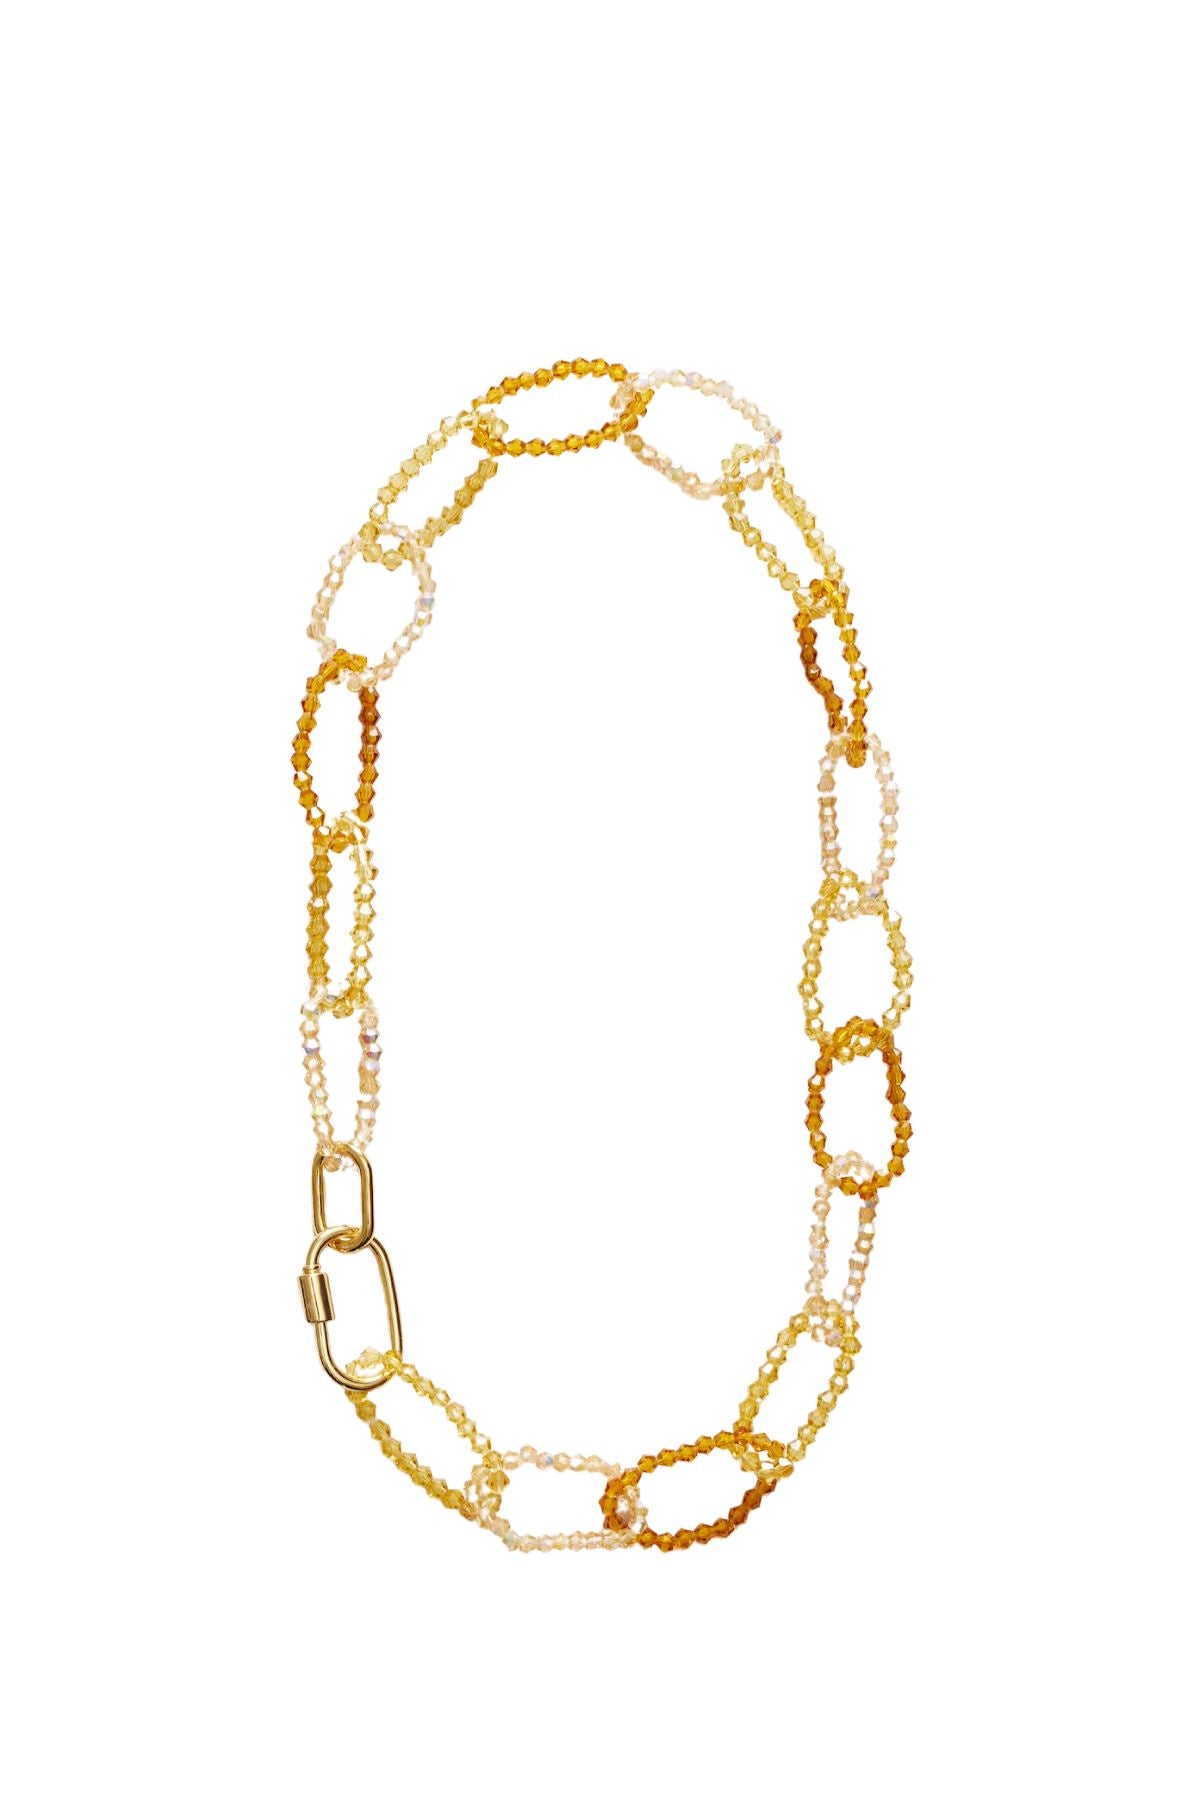 Anni Lu Bling-a-Ling Necklace - Gold